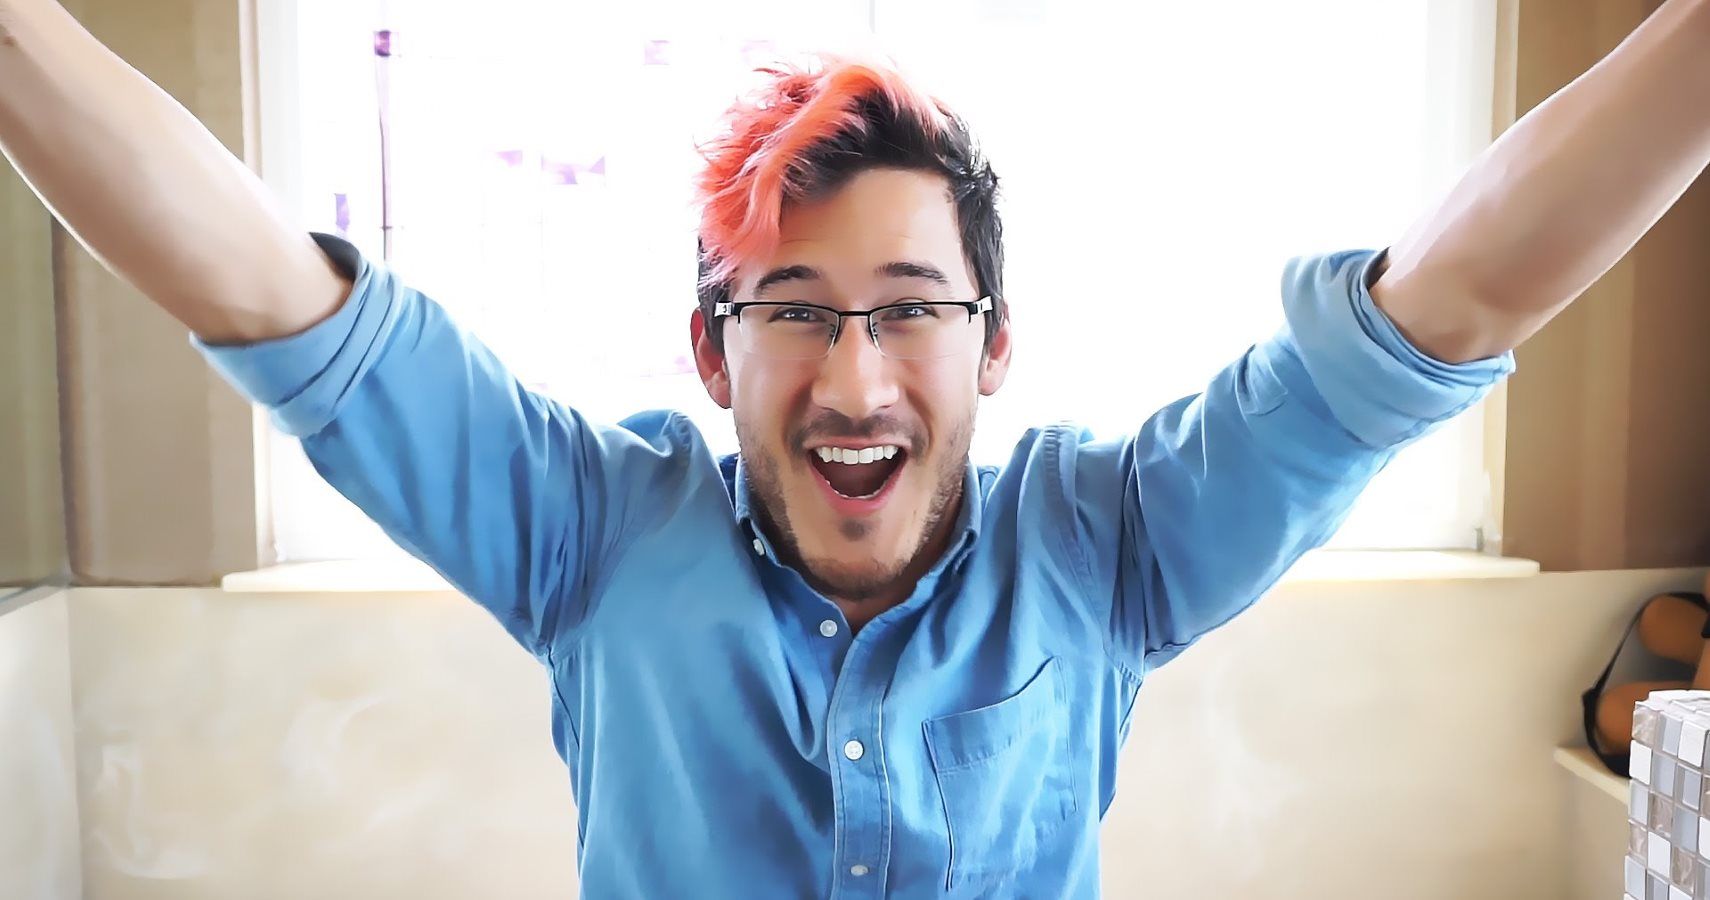 Markiplier Is Worth About $24 Million, Says 